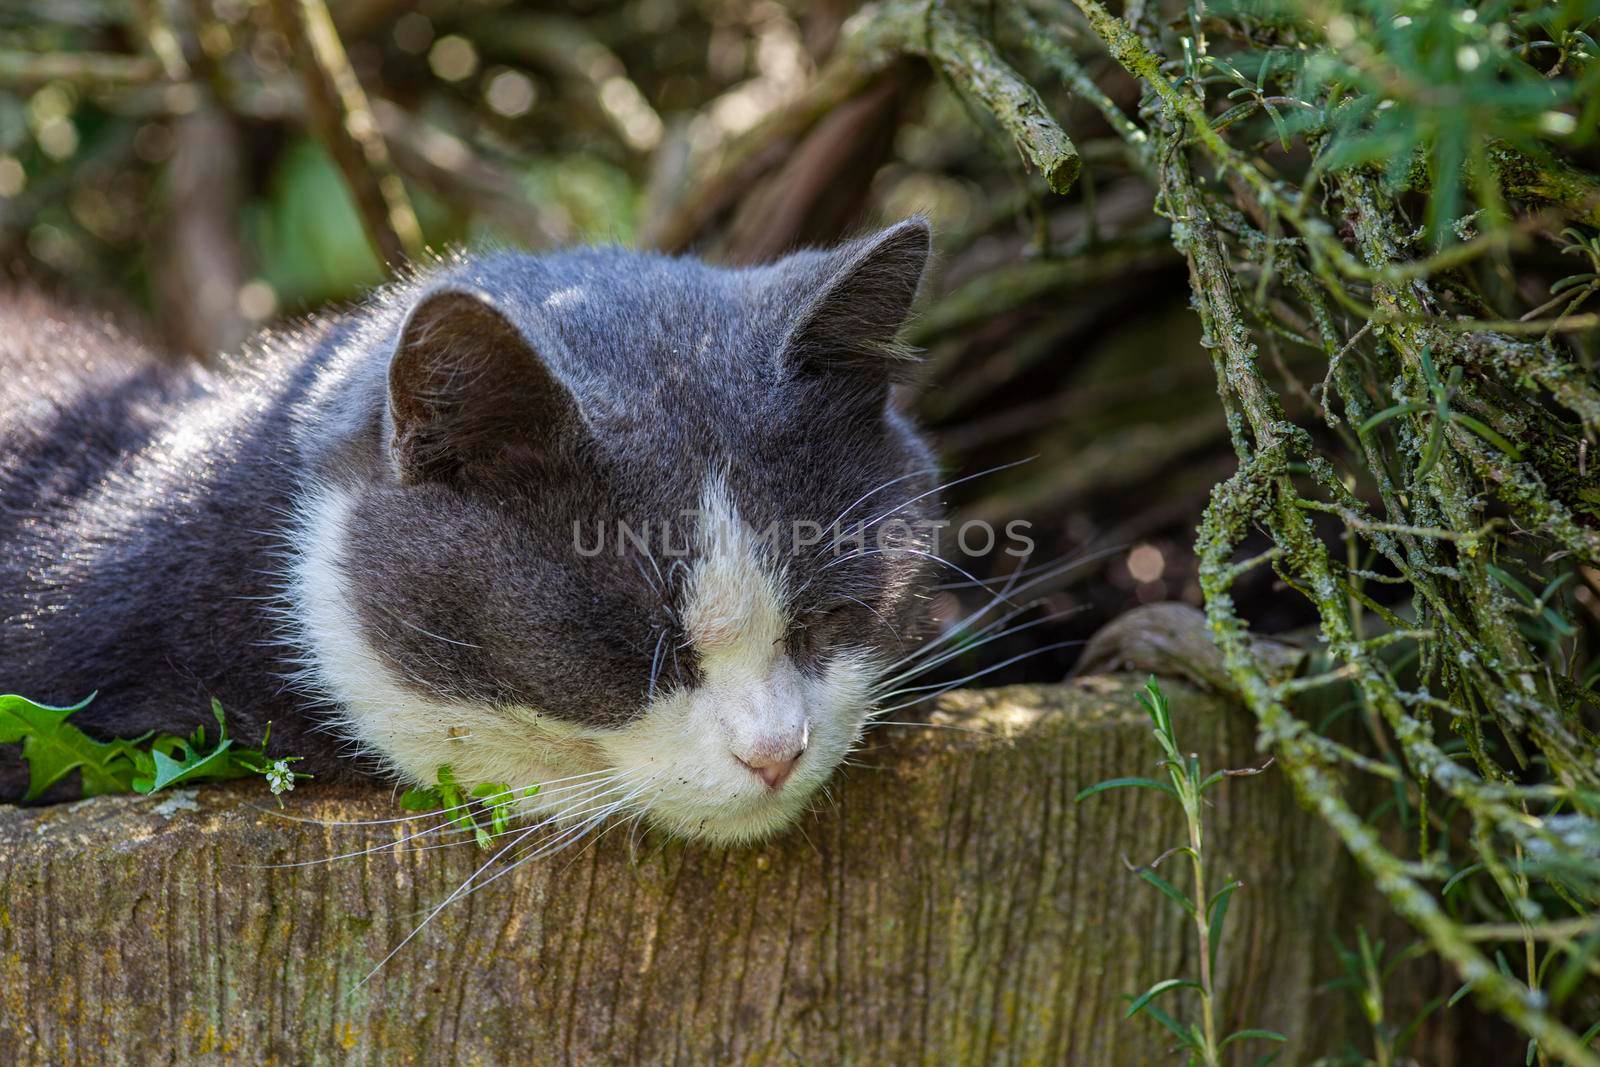 Cute cat sleeps nestled among the plants 3 by pippocarlot